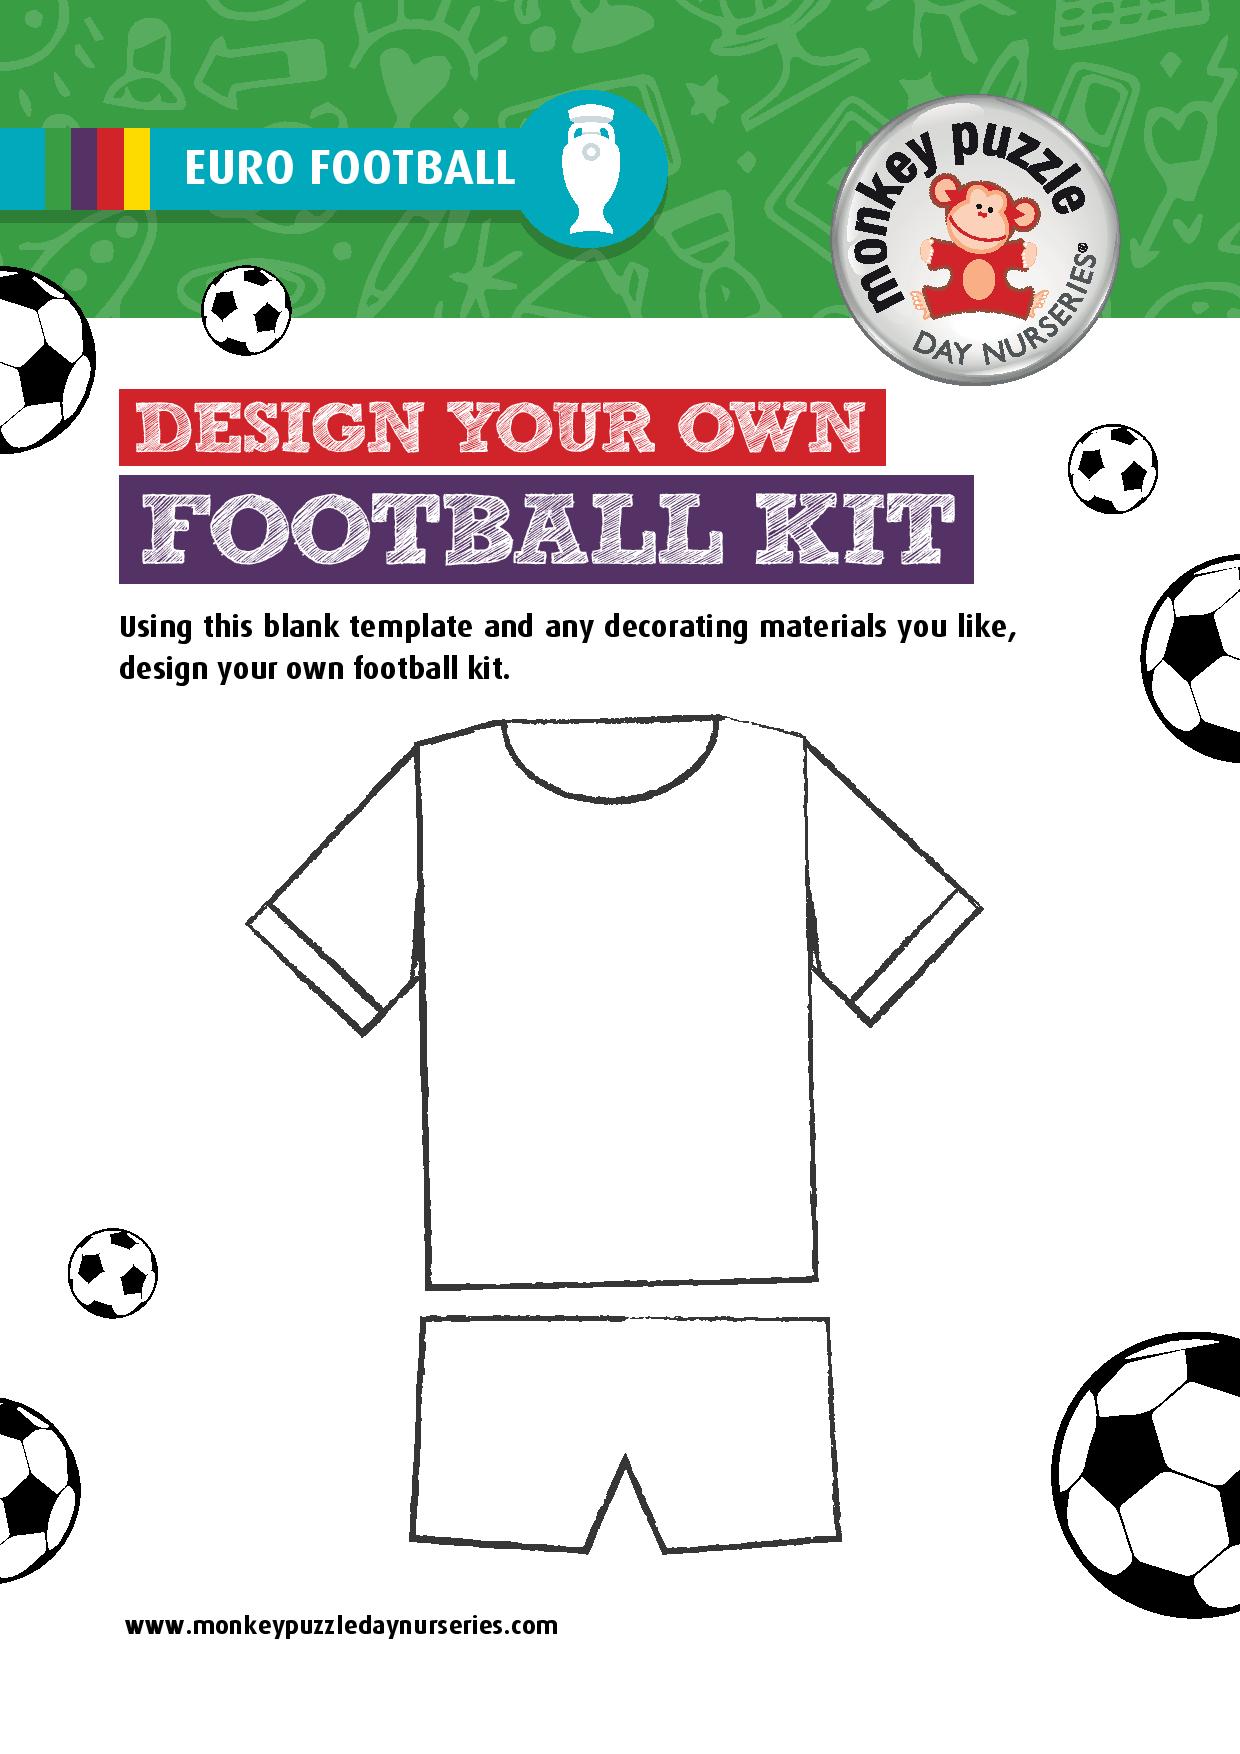 Design Your Own Football Kit Activity